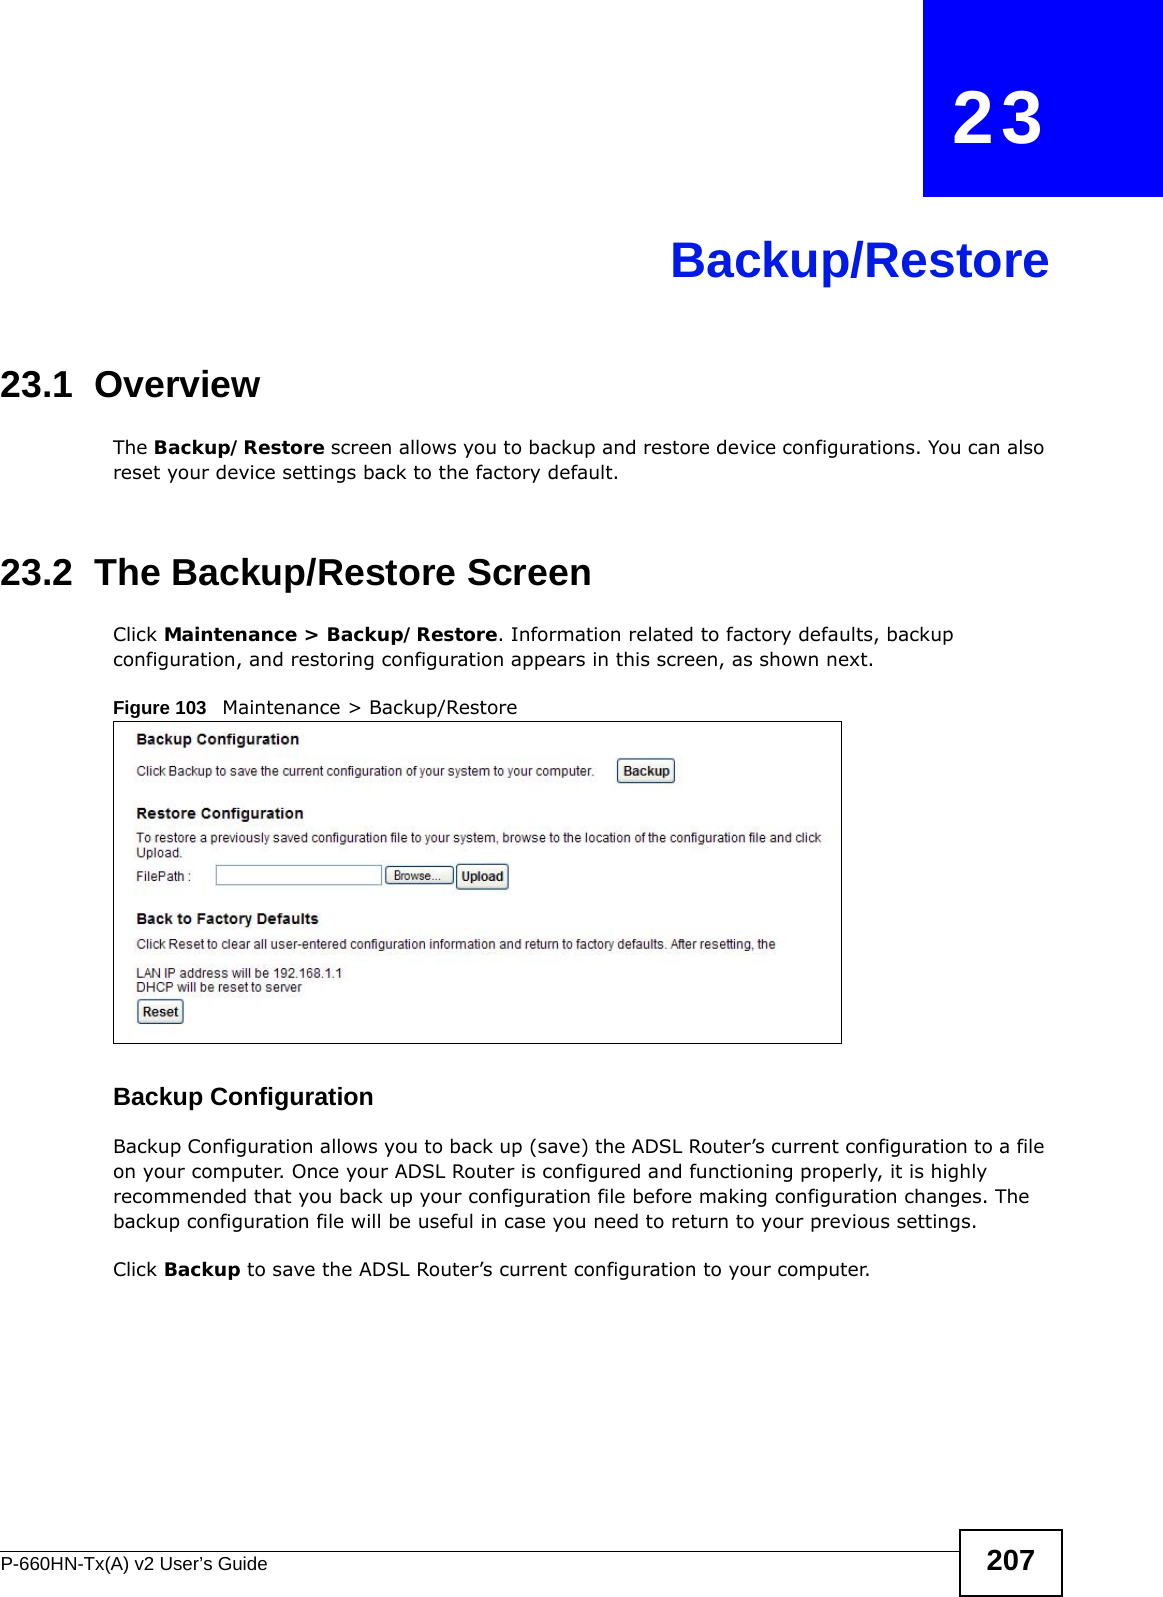 P-660HN-Tx(A) v2 User’s Guide 207CHAPTER   23Backup/Restore23.1  OverviewThe Backup/Restore screen allows you to backup and restore device configurations. You can also reset your device settings back to the factory default.23.2  The Backup/Restore Screen Click Maintenance &gt; Backup/Restore. Information related to factory defaults, backup configuration, and restoring configuration appears in this screen, as shown next.Figure 103   Maintenance &gt; Backup/RestoreBackup Configuration Backup Configuration allows you to back up (save) the ADSL Router’s current configuration to a file on your computer. Once your ADSL Router is configured and functioning properly, it is highly recommended that you back up your configuration file before making configuration changes. The backup configuration file will be useful in case you need to return to your previous settings. Click Backup to save the ADSL Router’s current configuration to your computer.